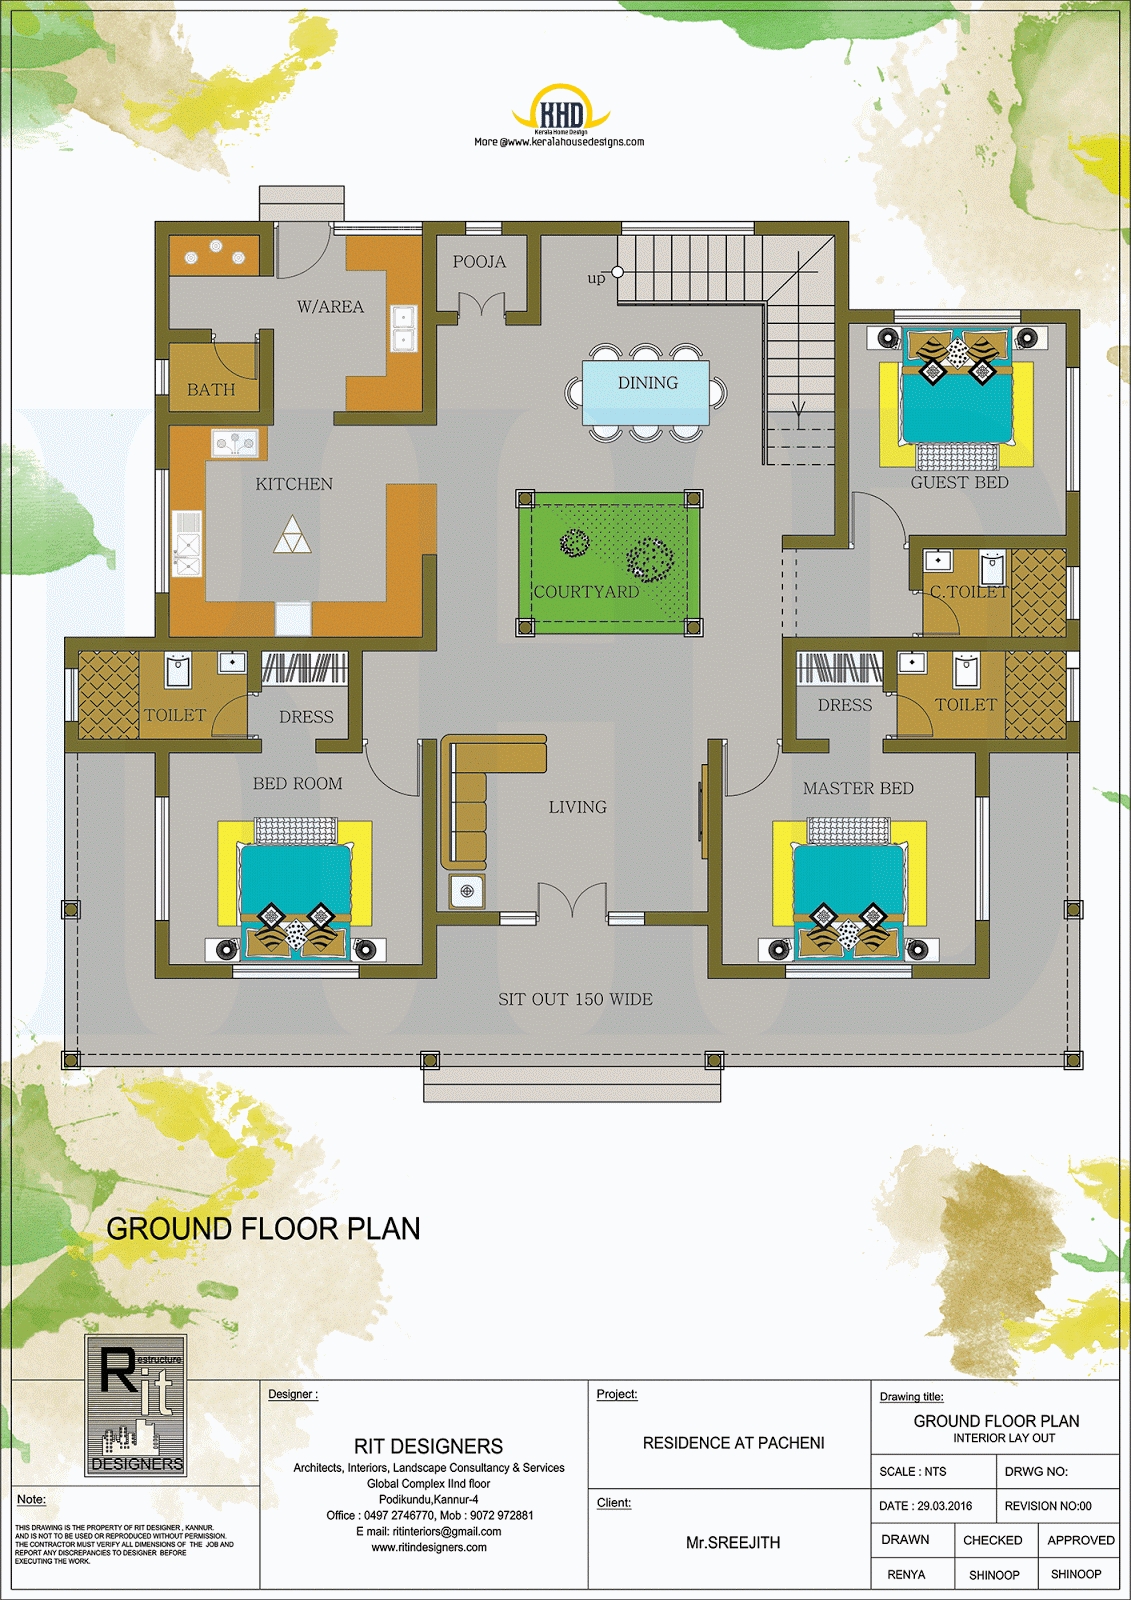 Remarkable kerala traditional home with plan kerala home design and floor plans regarding great kerala 3 bedroom home plans 3d